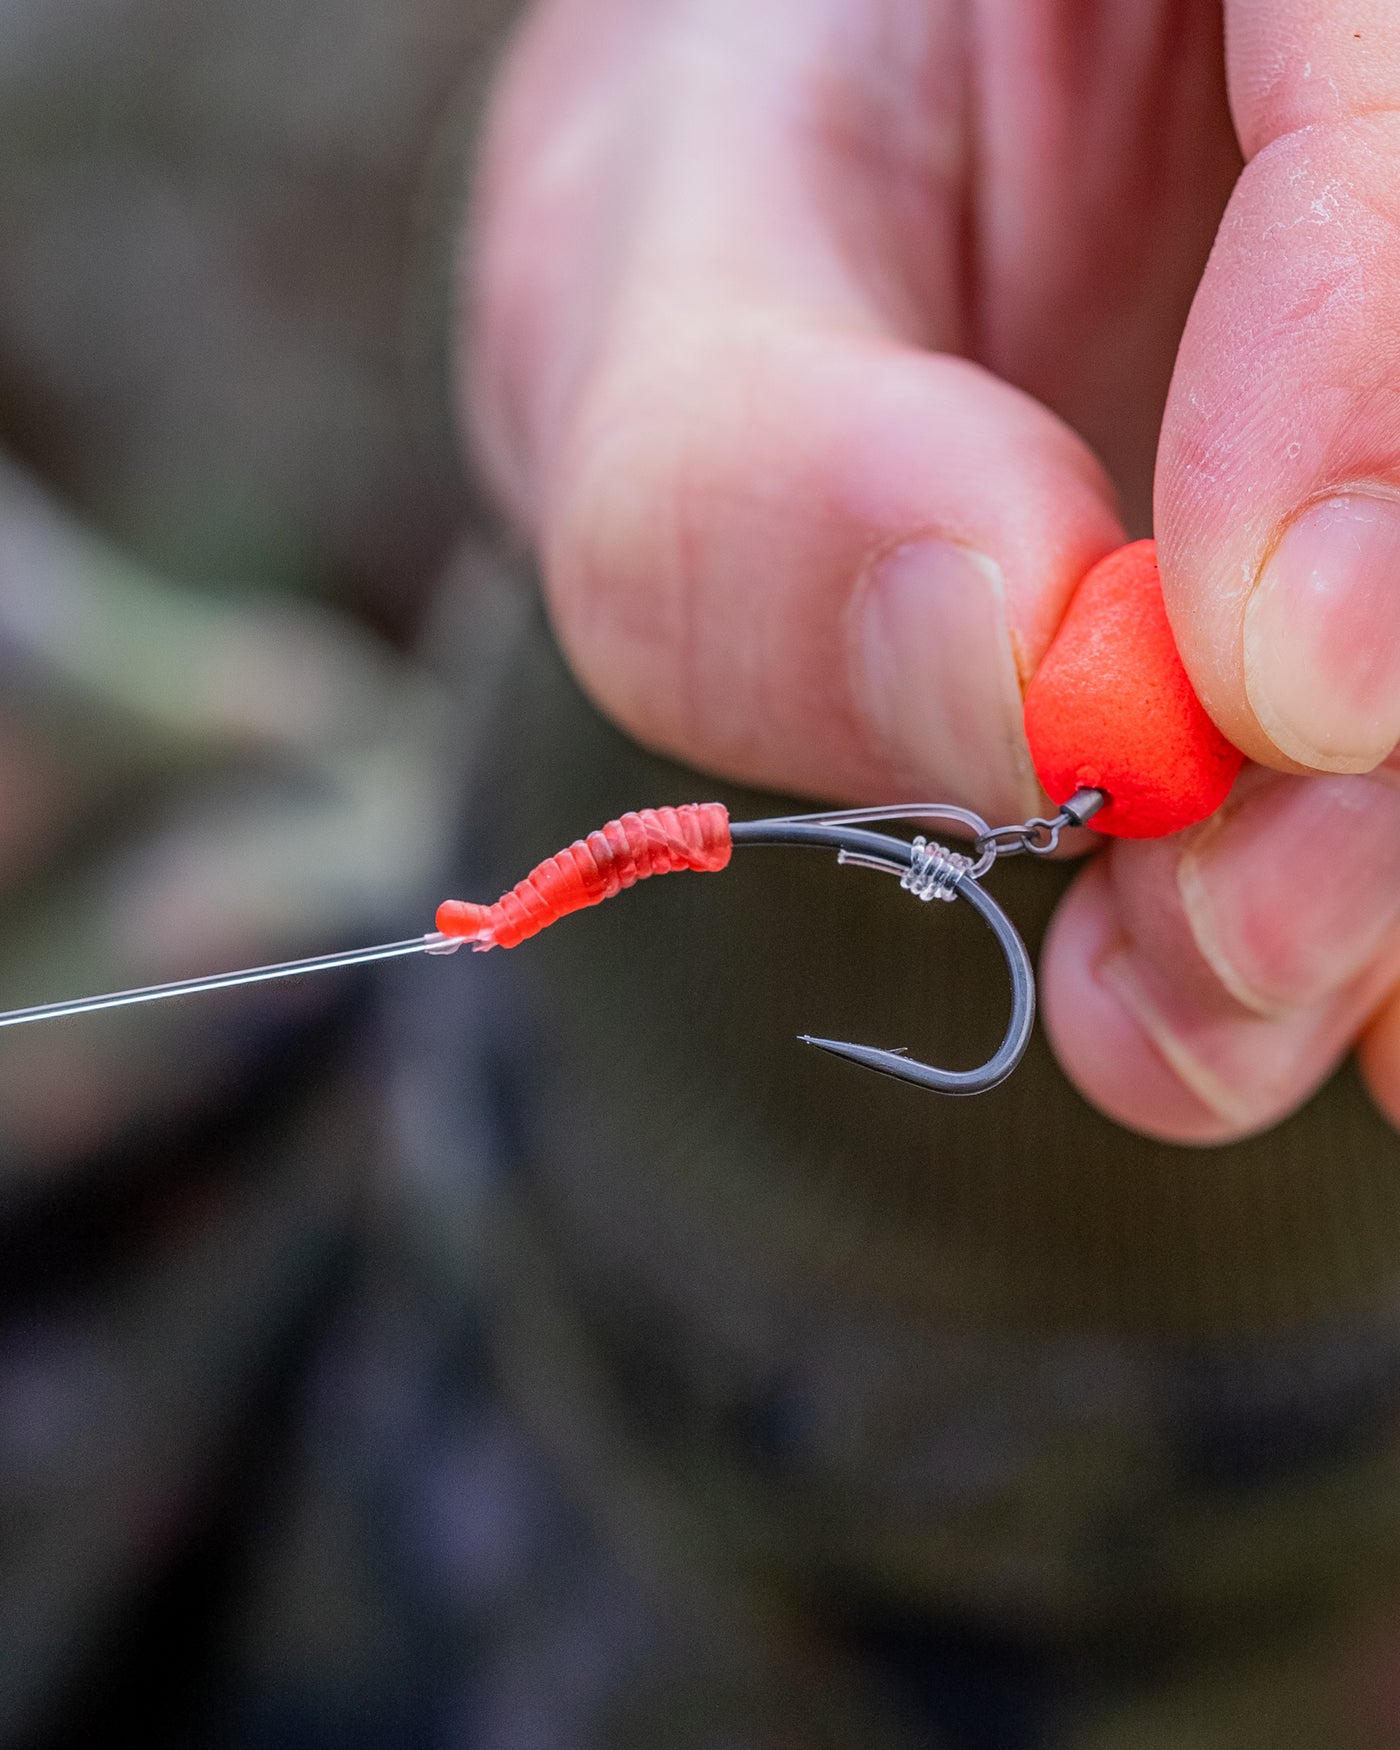 Meta-Terminal Tackle All-in-1 Rig-Fuzed Leader Leader Leadclip D-Rig